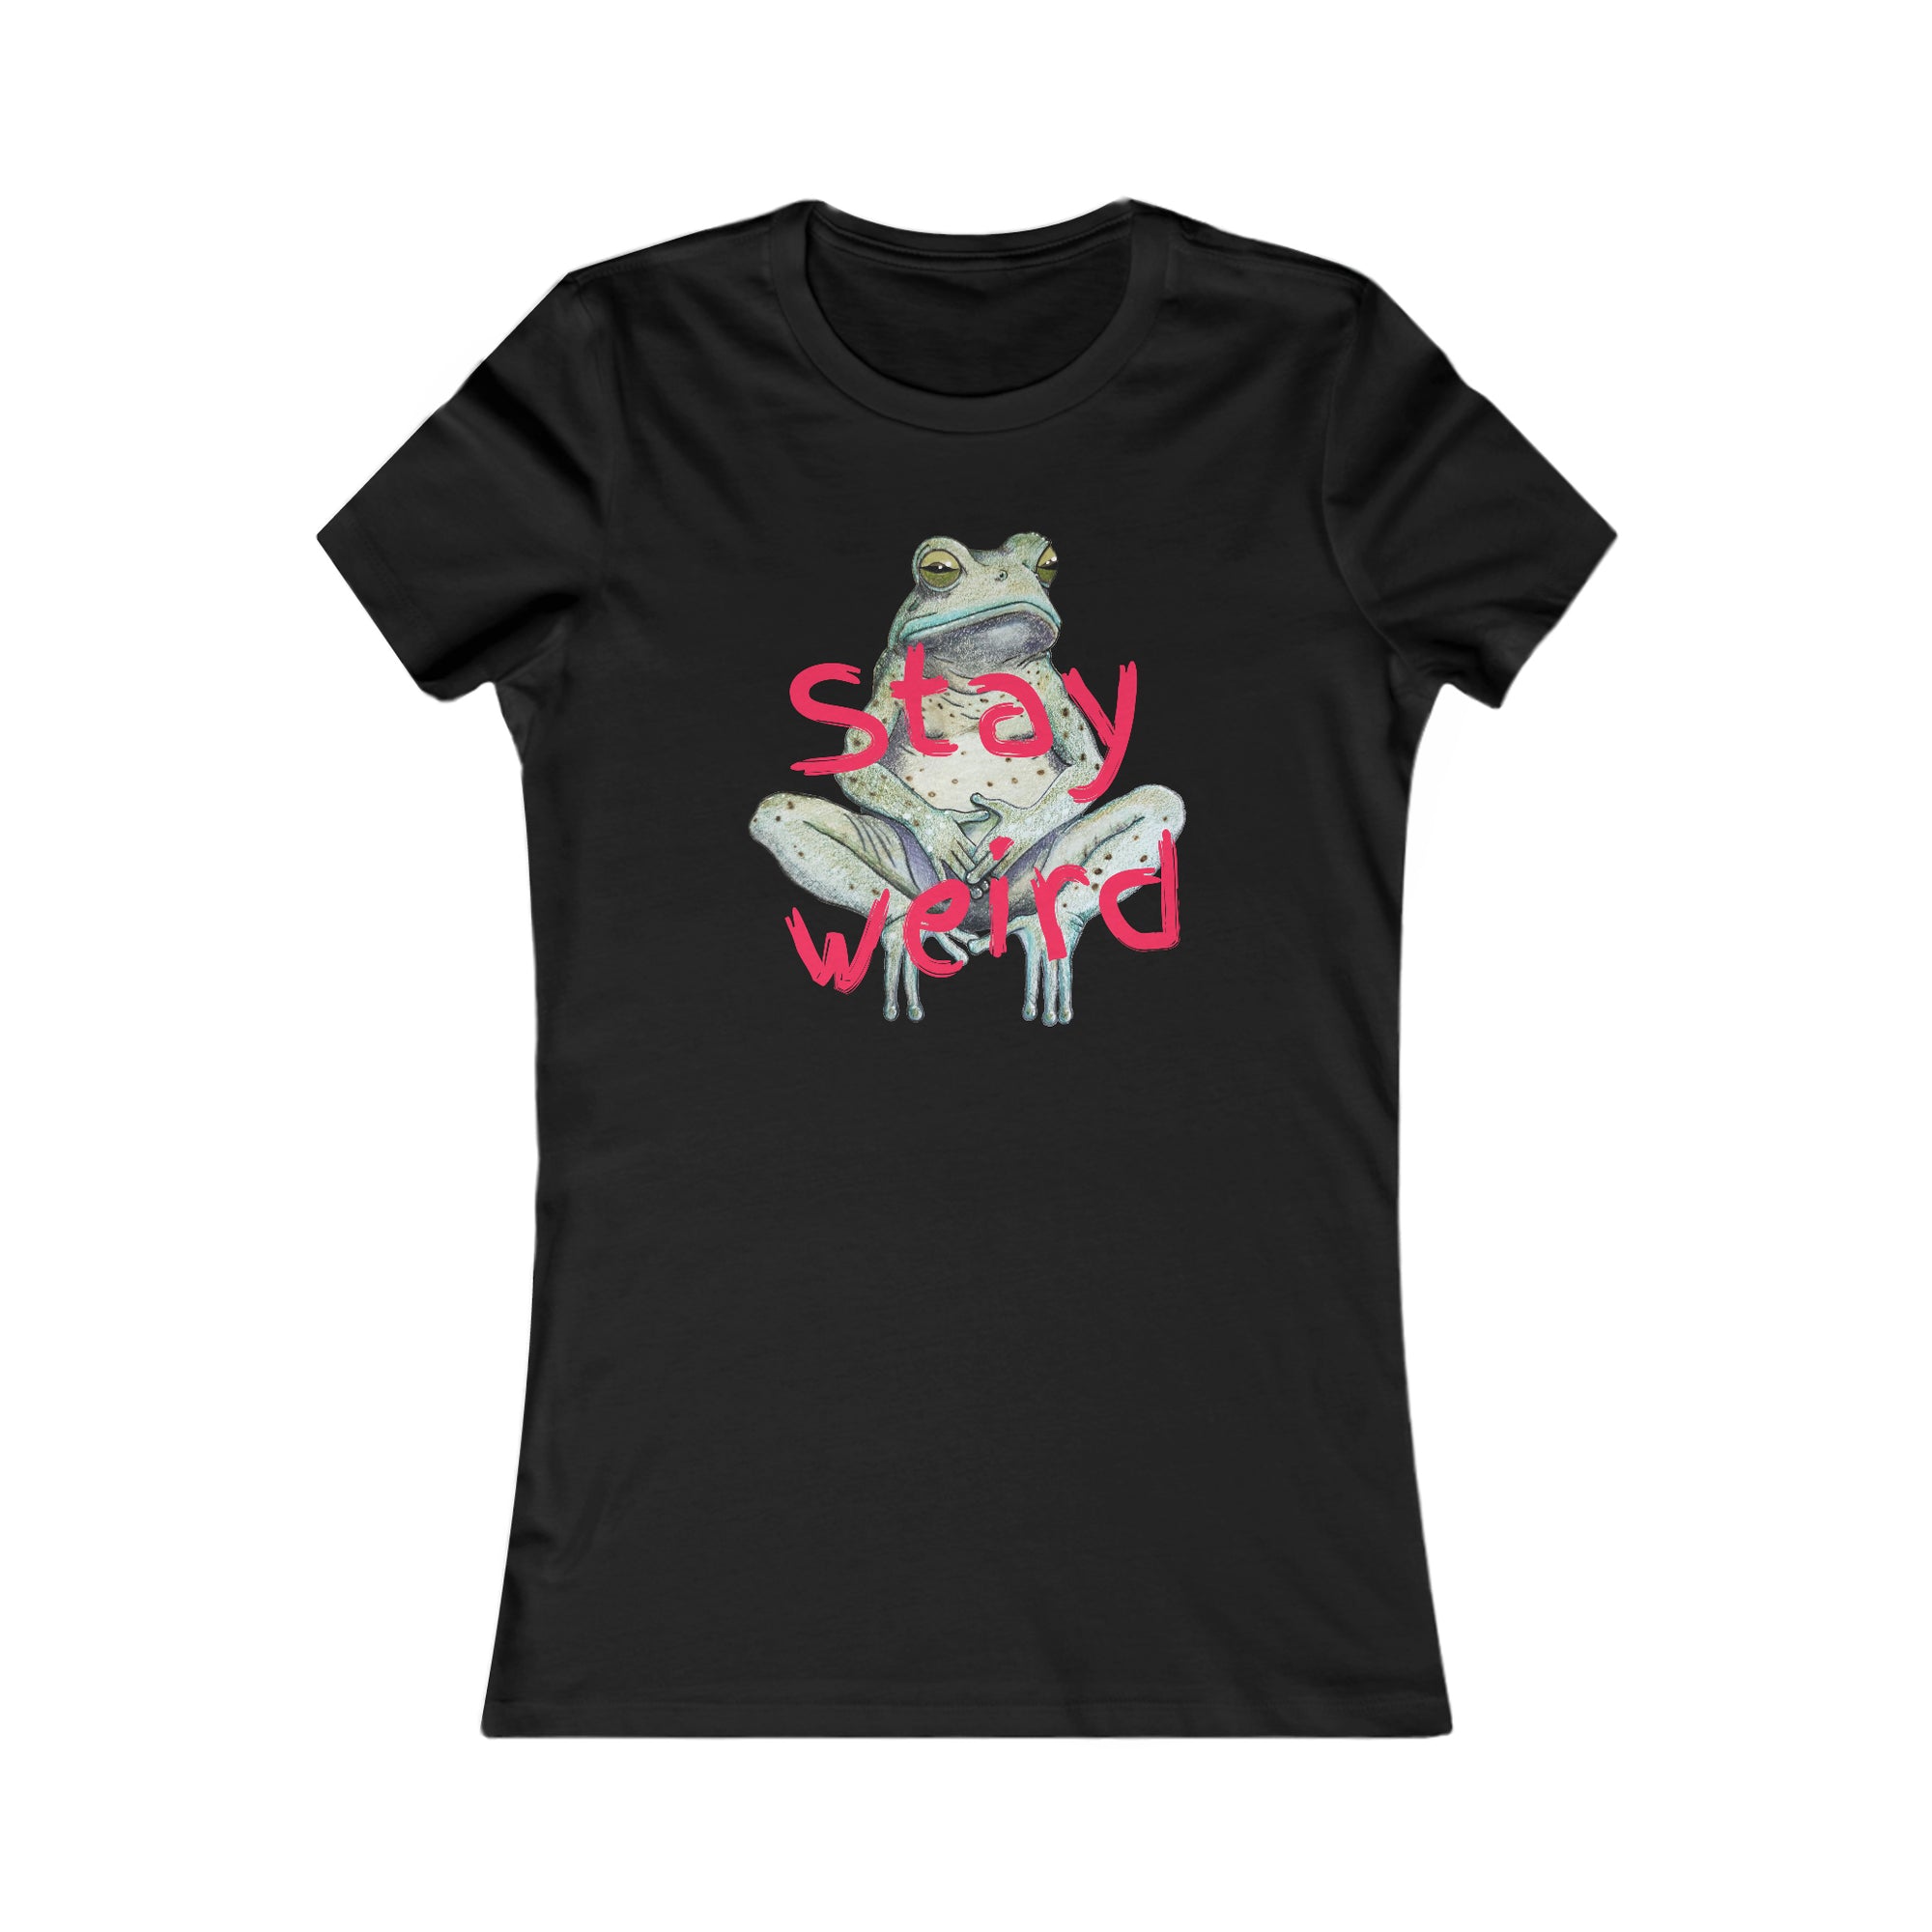 Stay Weird Fitted Tee